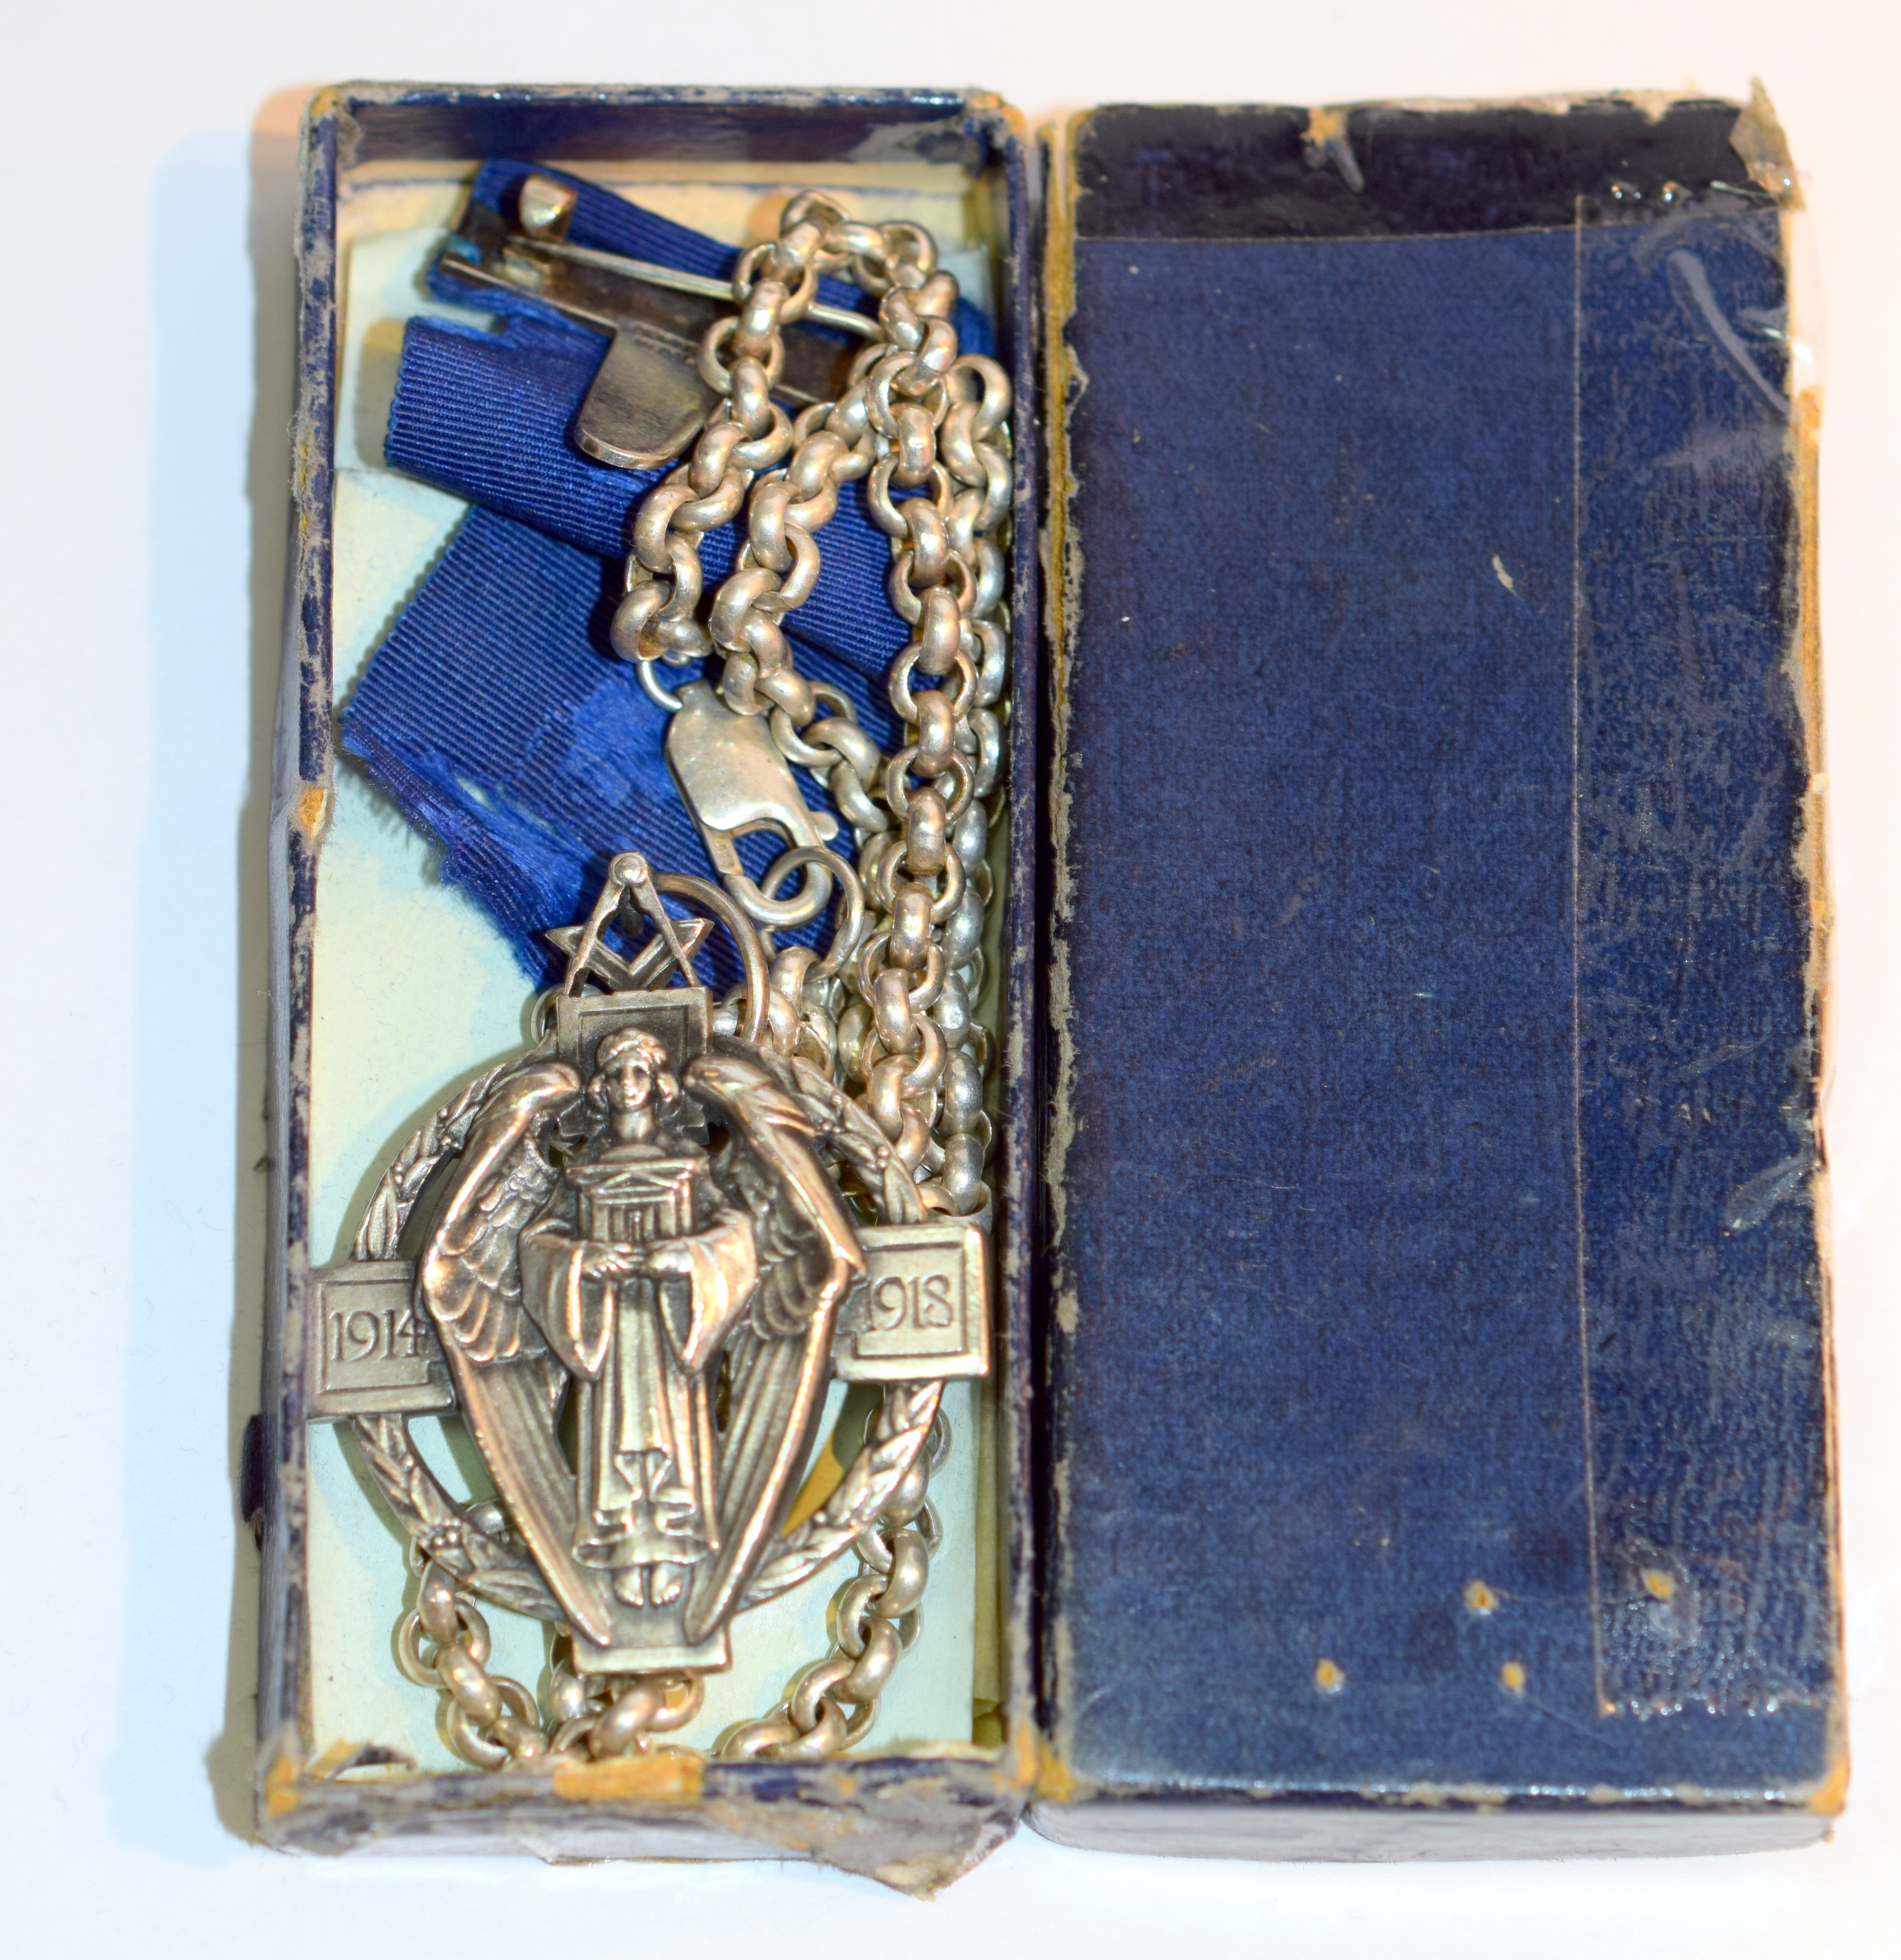 Masonic Silver Hall Stone jewel 1914-1918 On Silver Chain With Blue Ribbon - Image 5 of 6